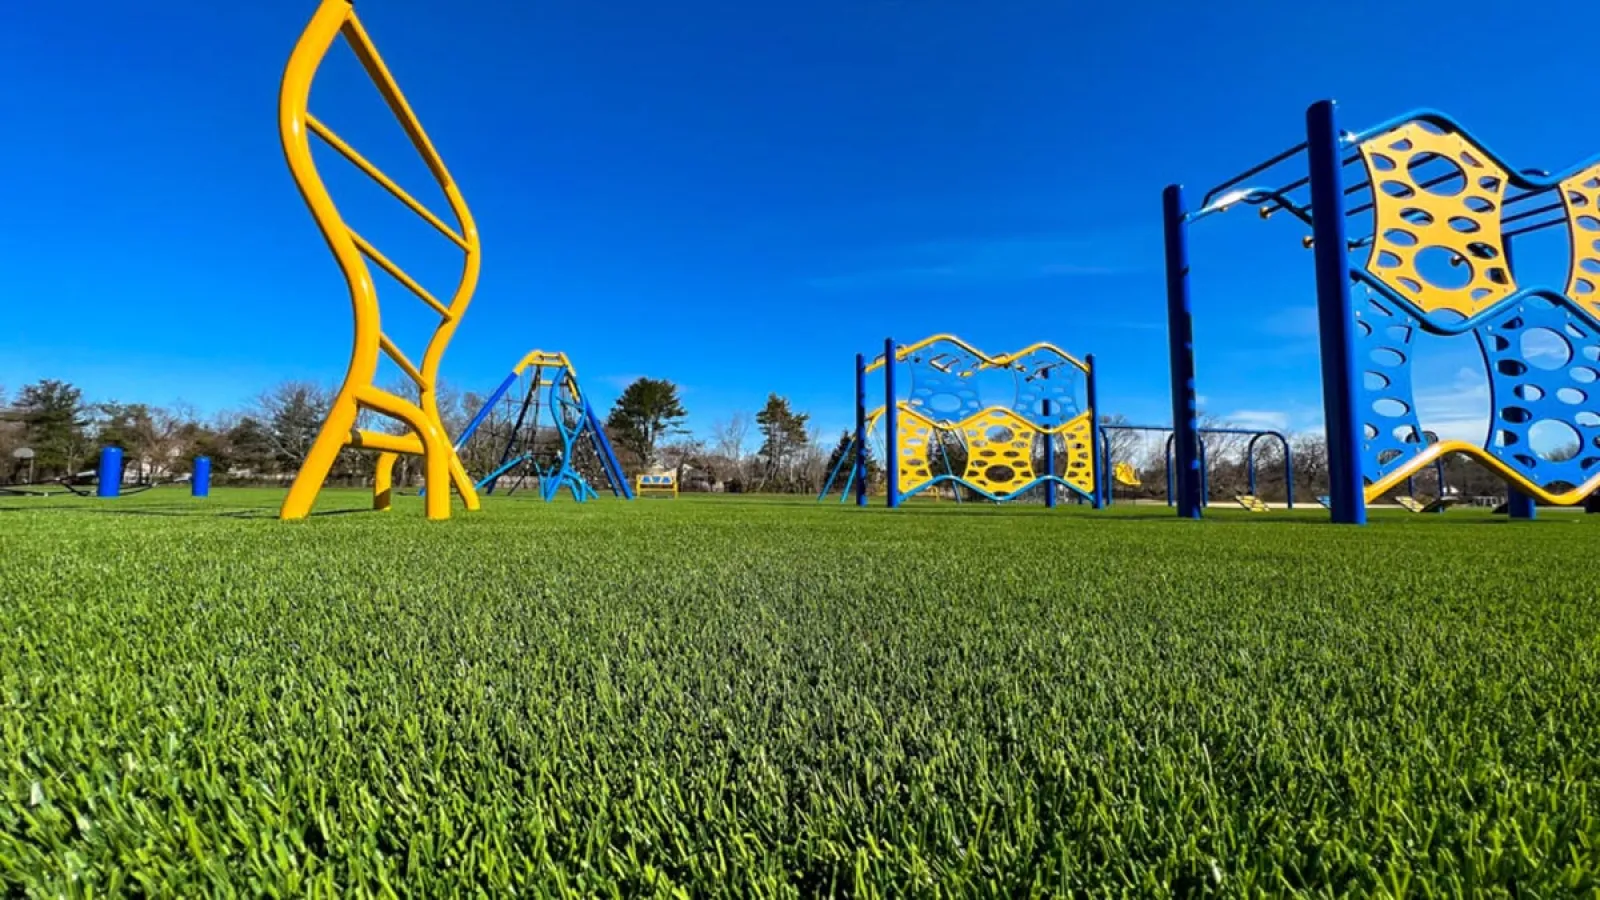 a grassy field with a playground set up in the background